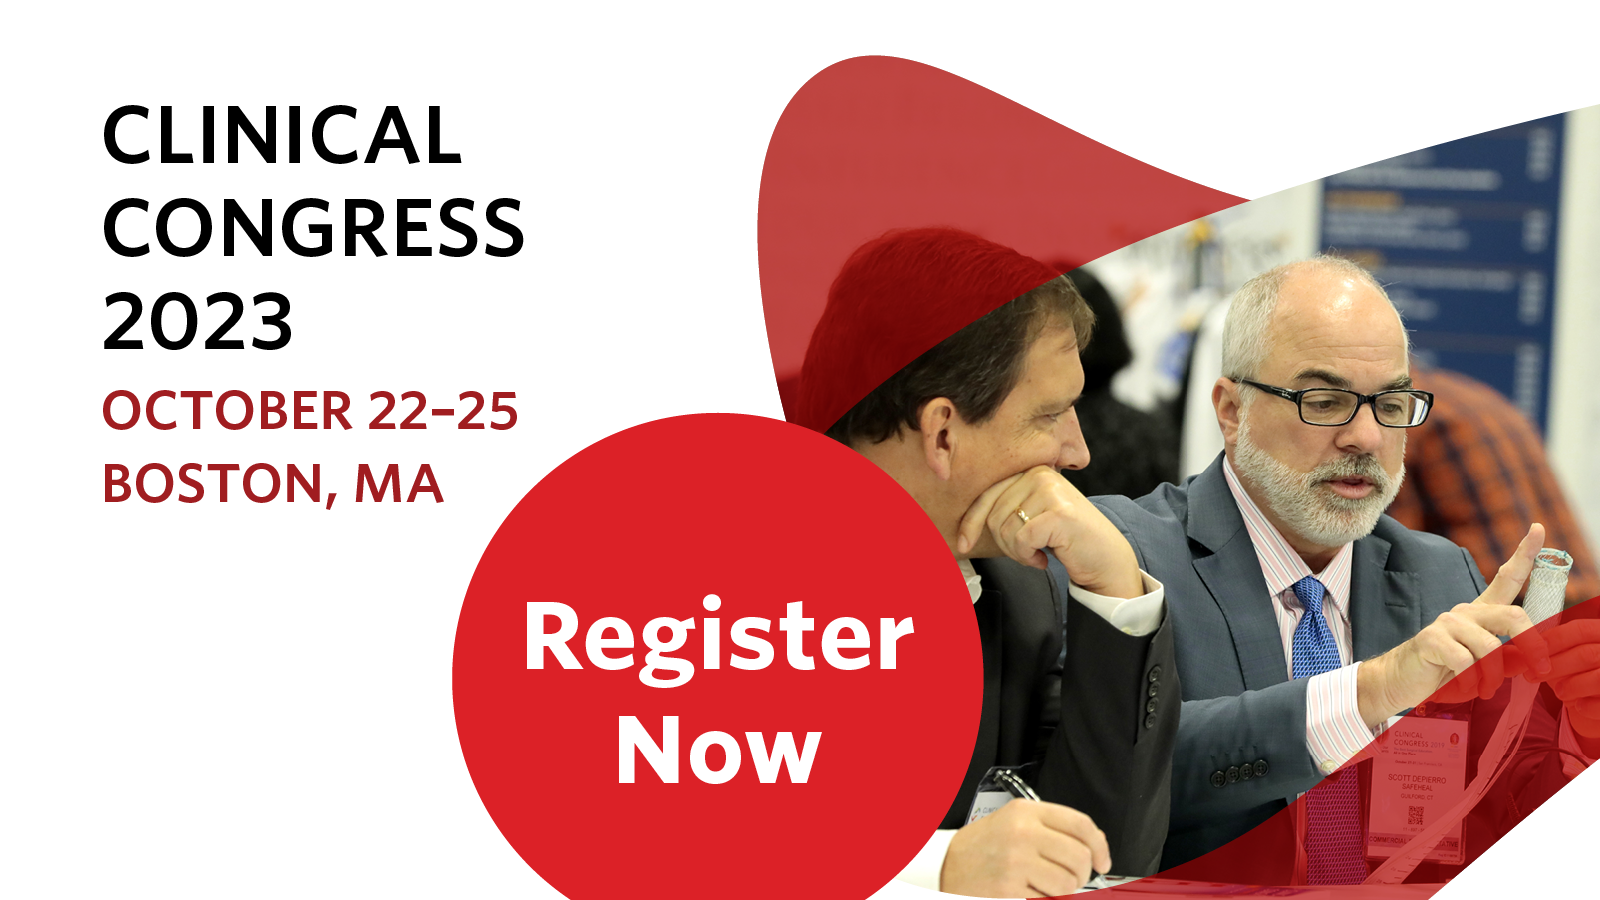 Take Advantage of Special Registration Rates for Clinical Congress by Wednesday 